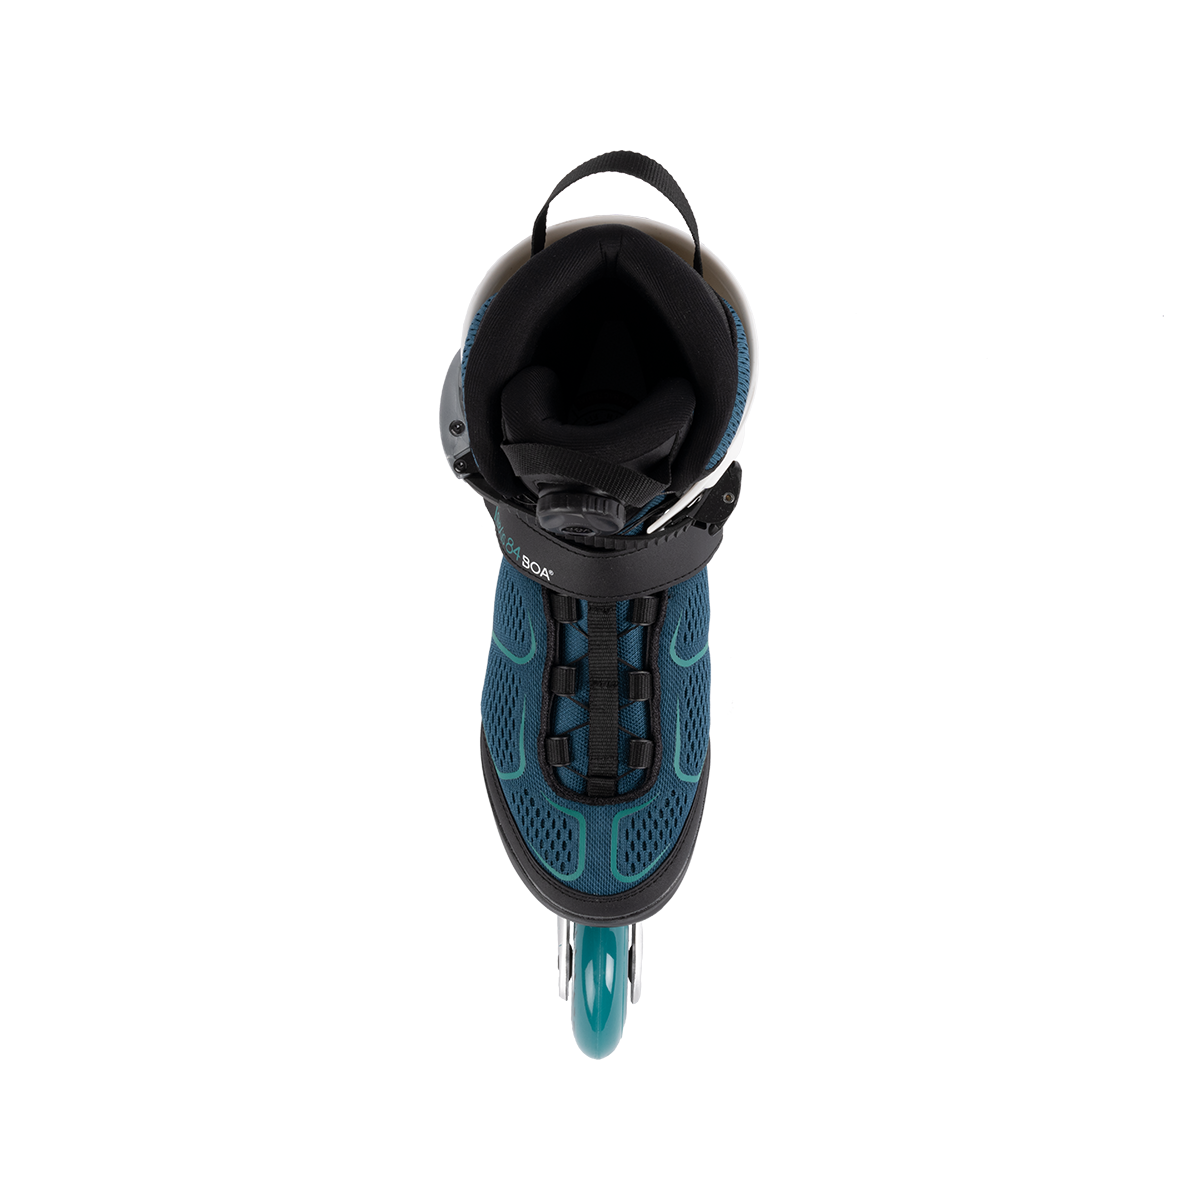 A top view of the K2 Alexis 84 BOA inline skate.